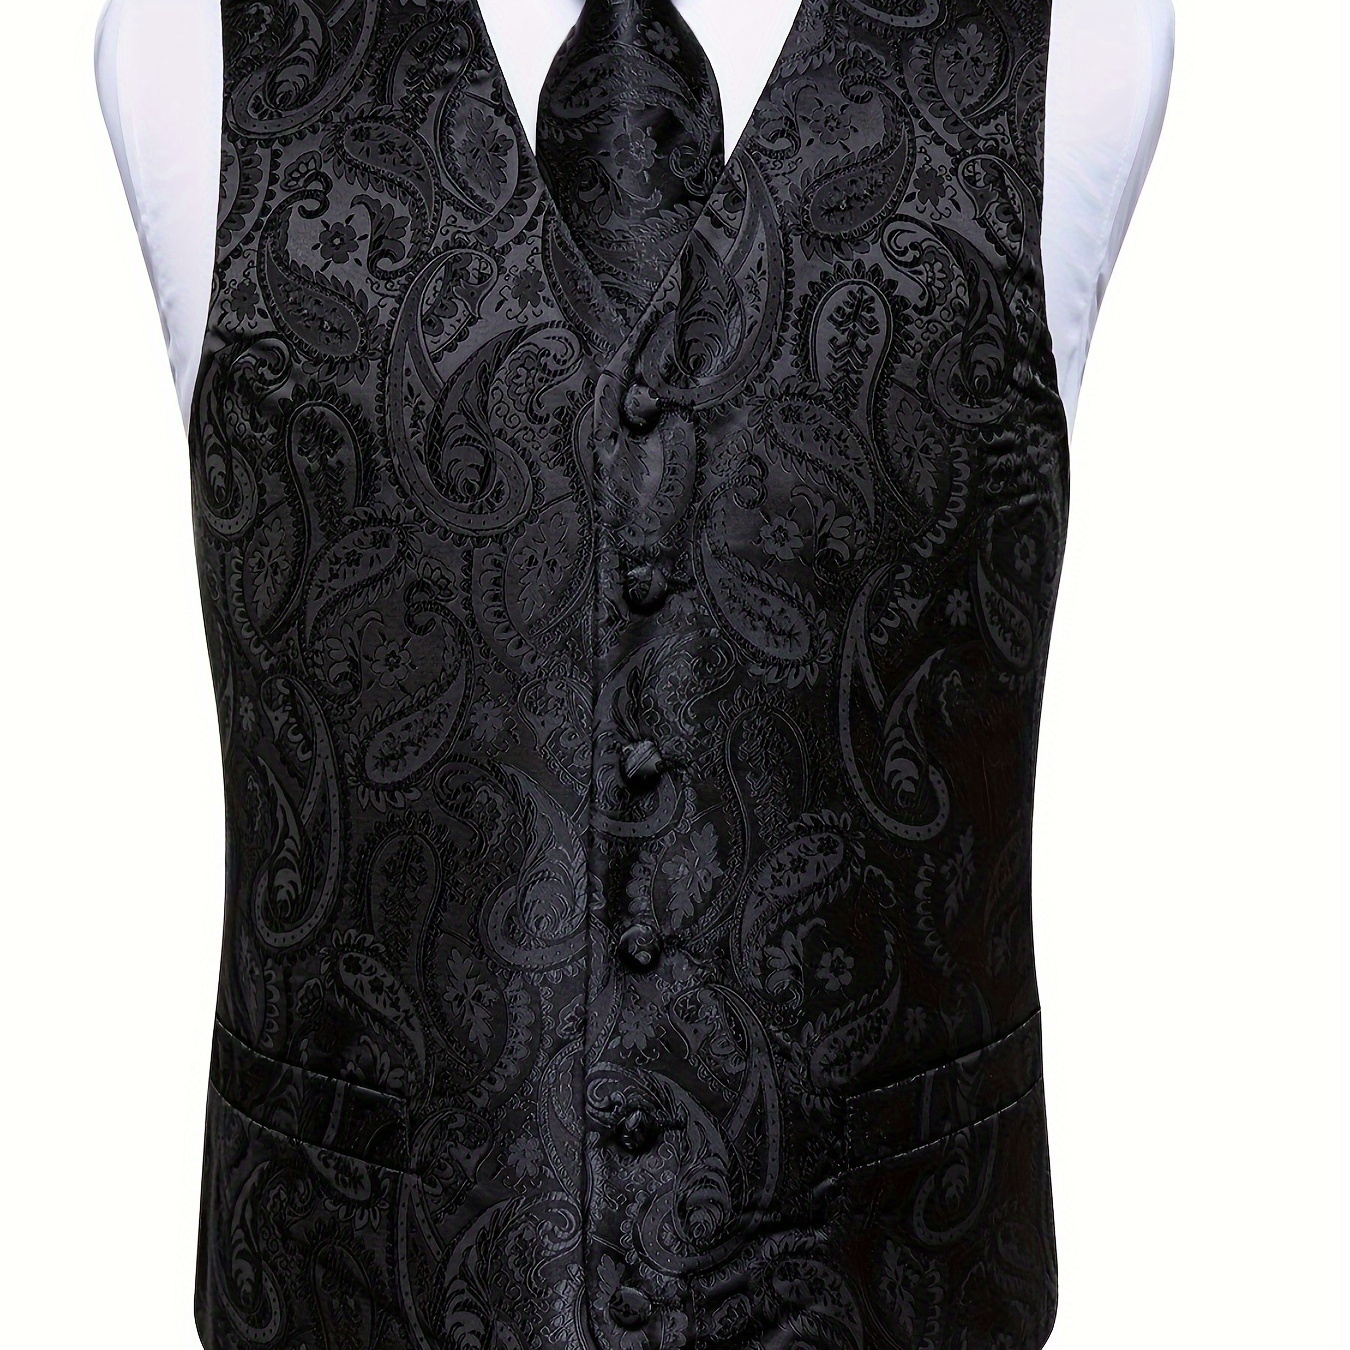 

Men's Solid Color Paisley Pattern Print Button Down And Sleeveless Suit Vest With Dual Front Pockets And A Back Tie, Suitable For Business, Wedding Party And Formal Occasions